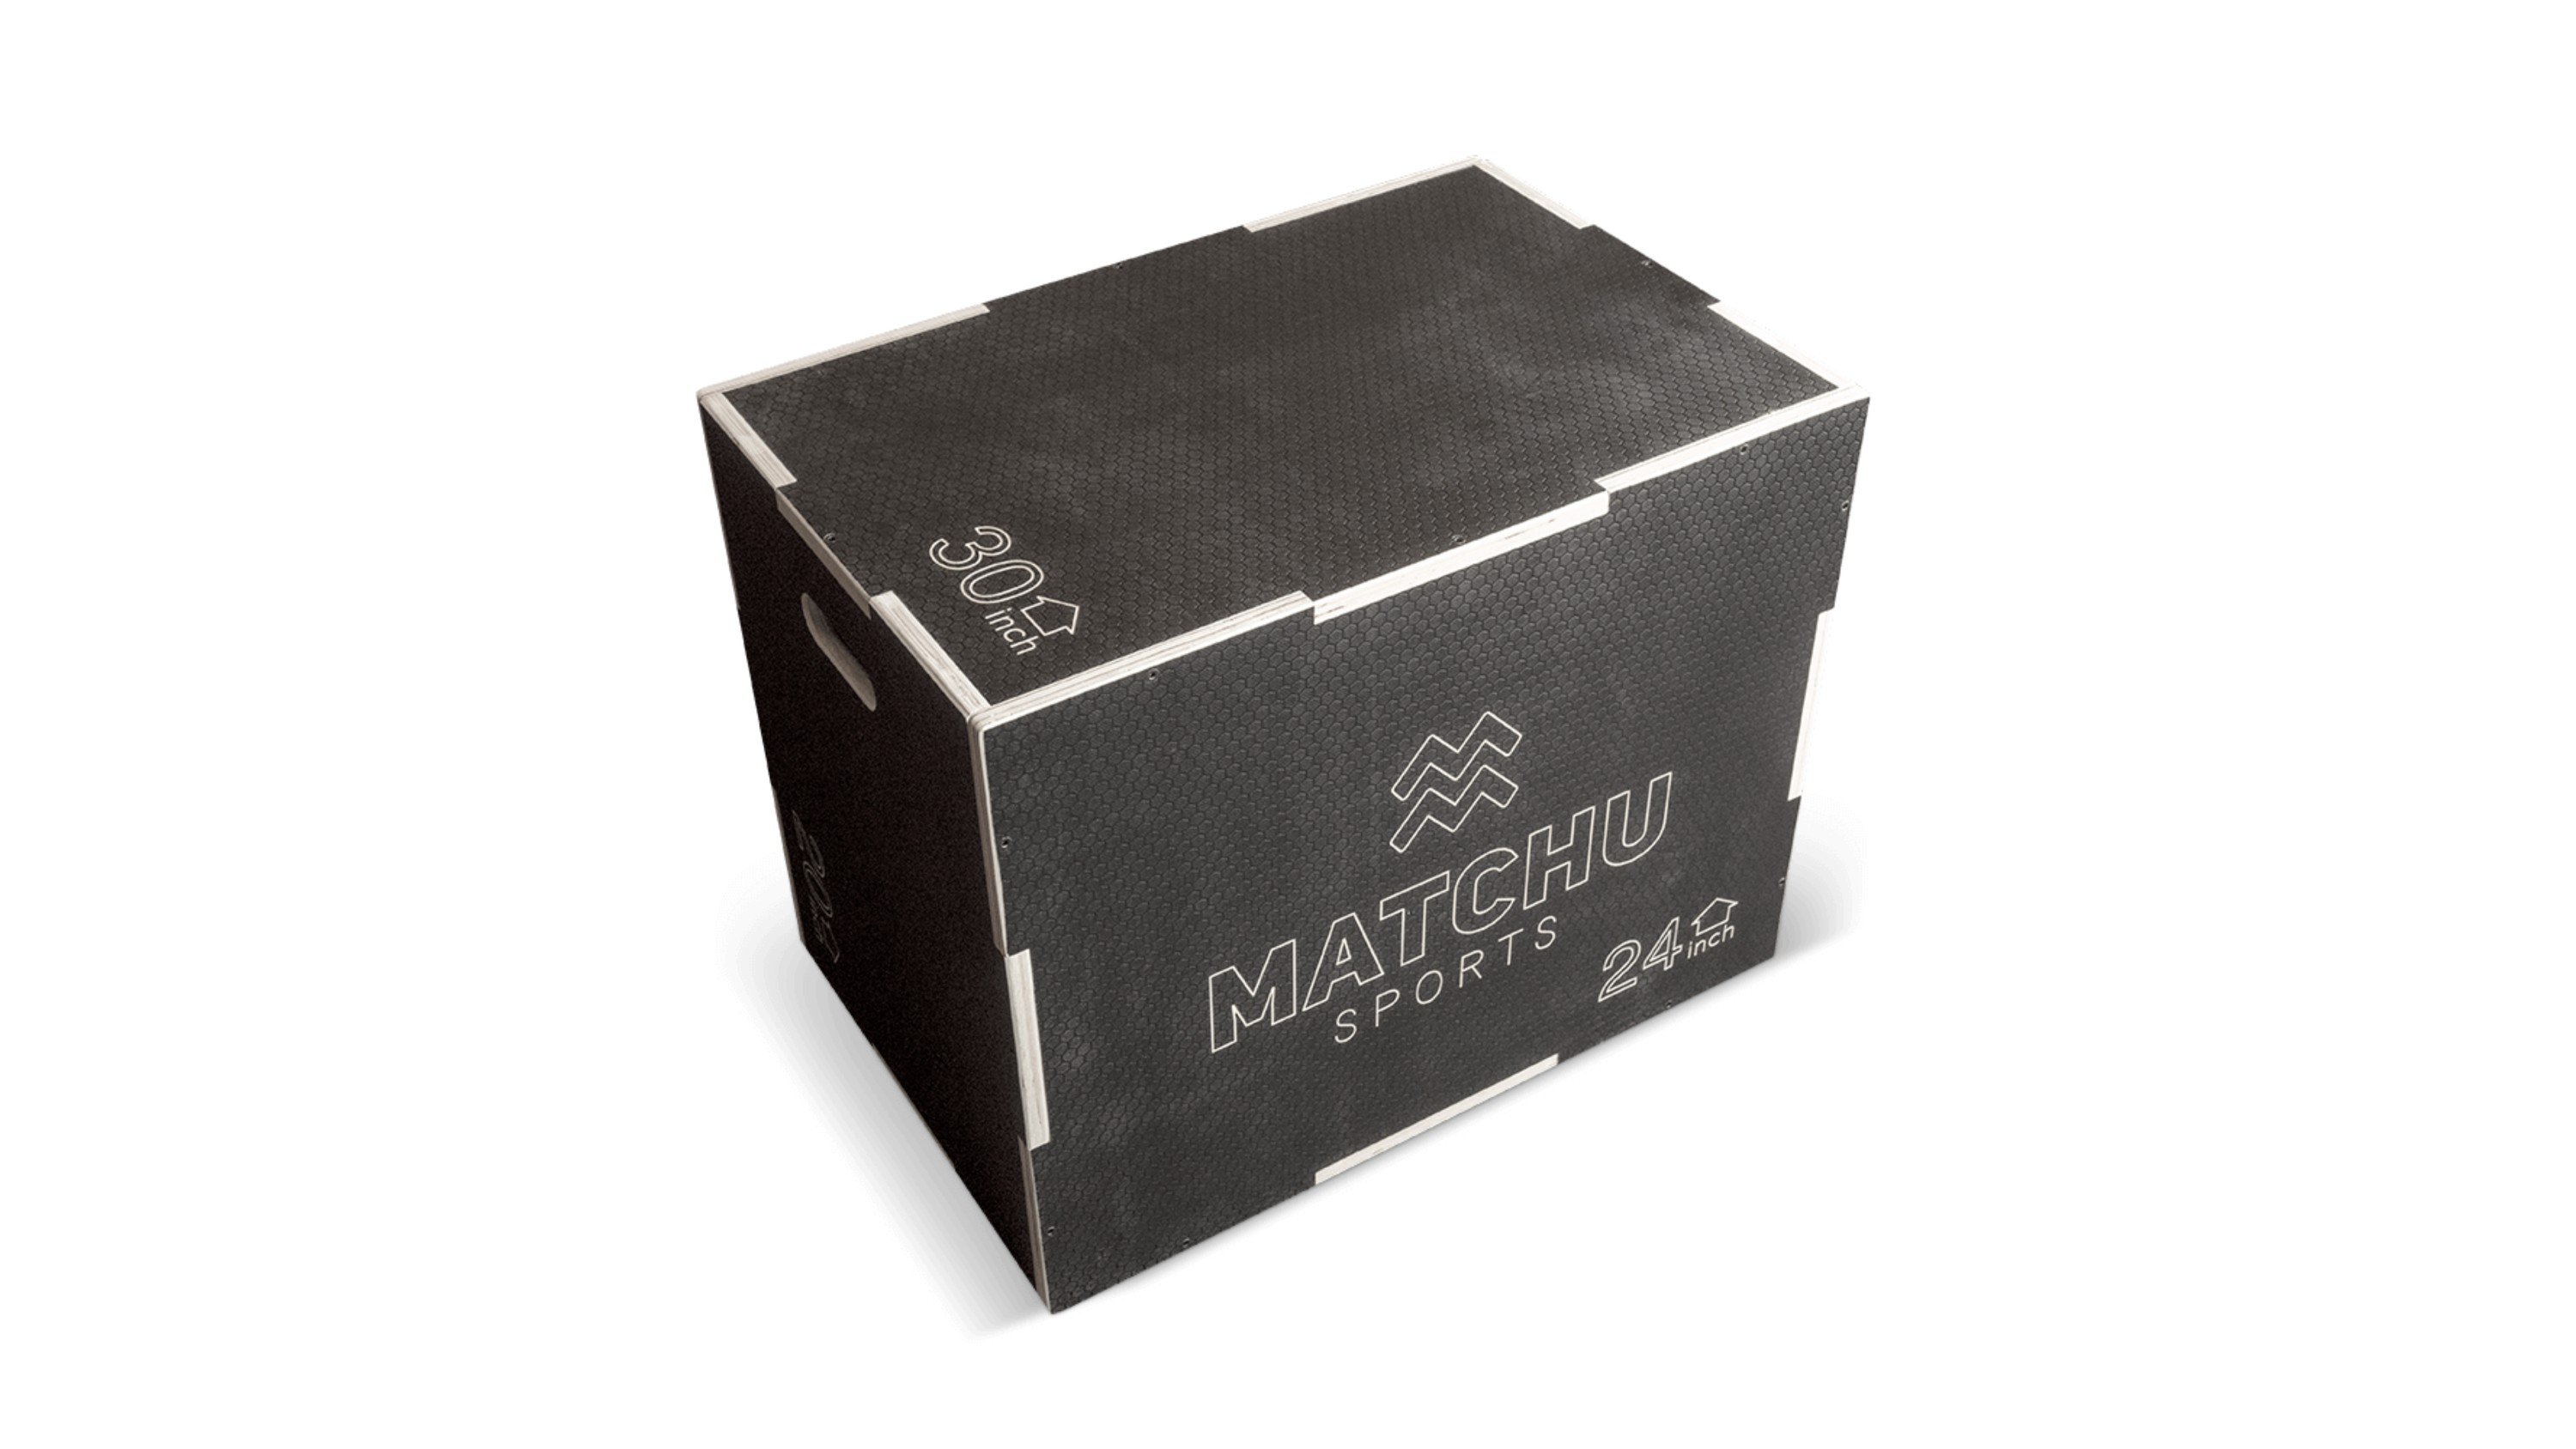 With this plyo box you improve jump strength and explosiveness
